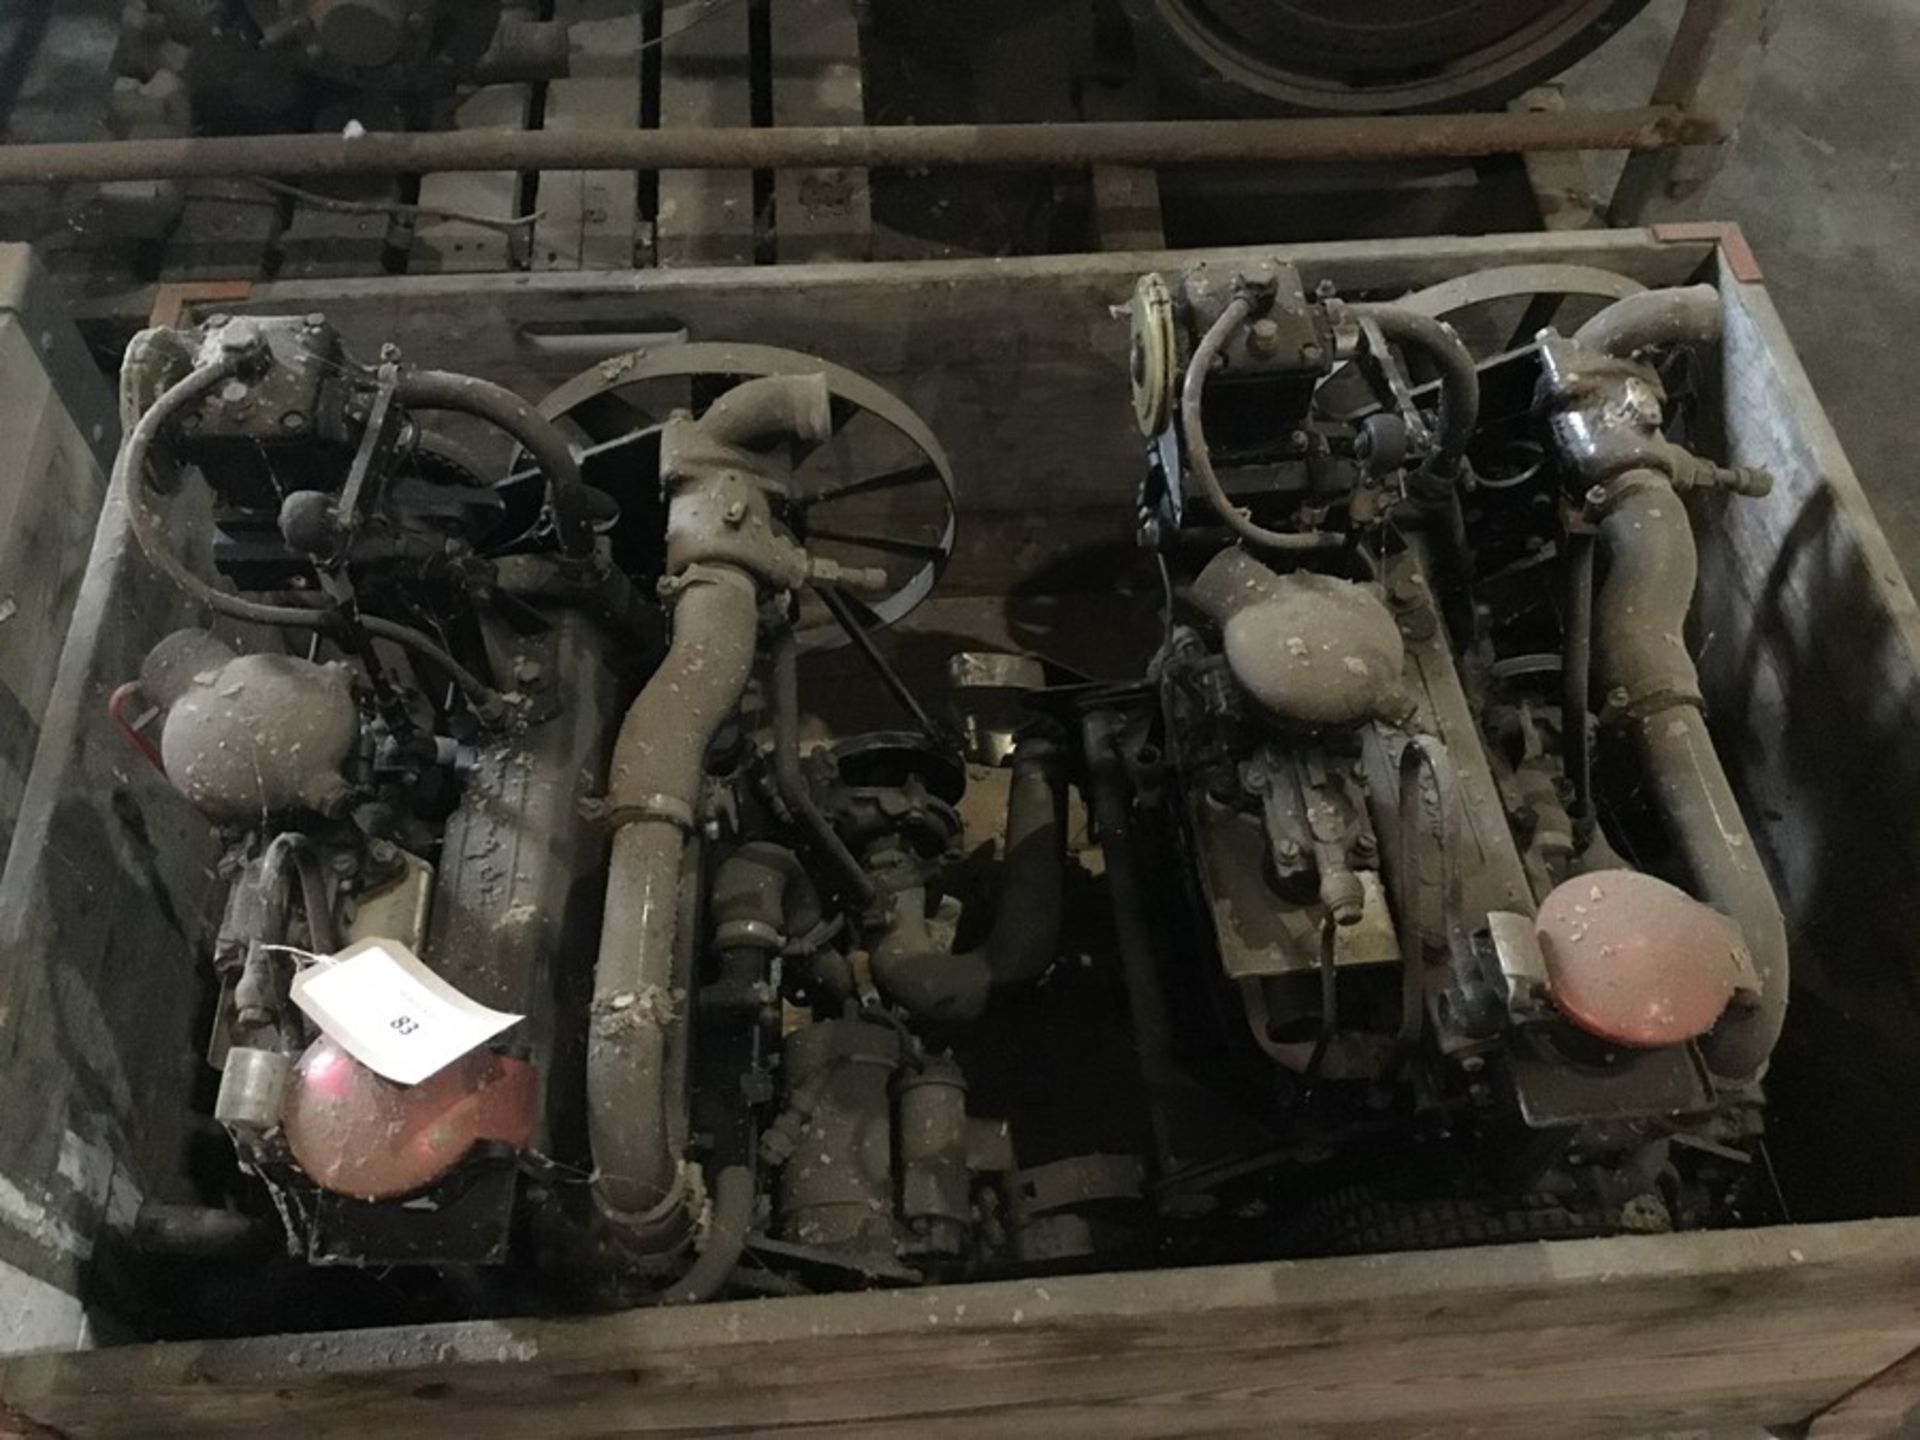 Pair of Coventry FWMB509 Petrol Engine: Coventry FWMB509 4cyl non turbo Incomplete - Image 3 of 6